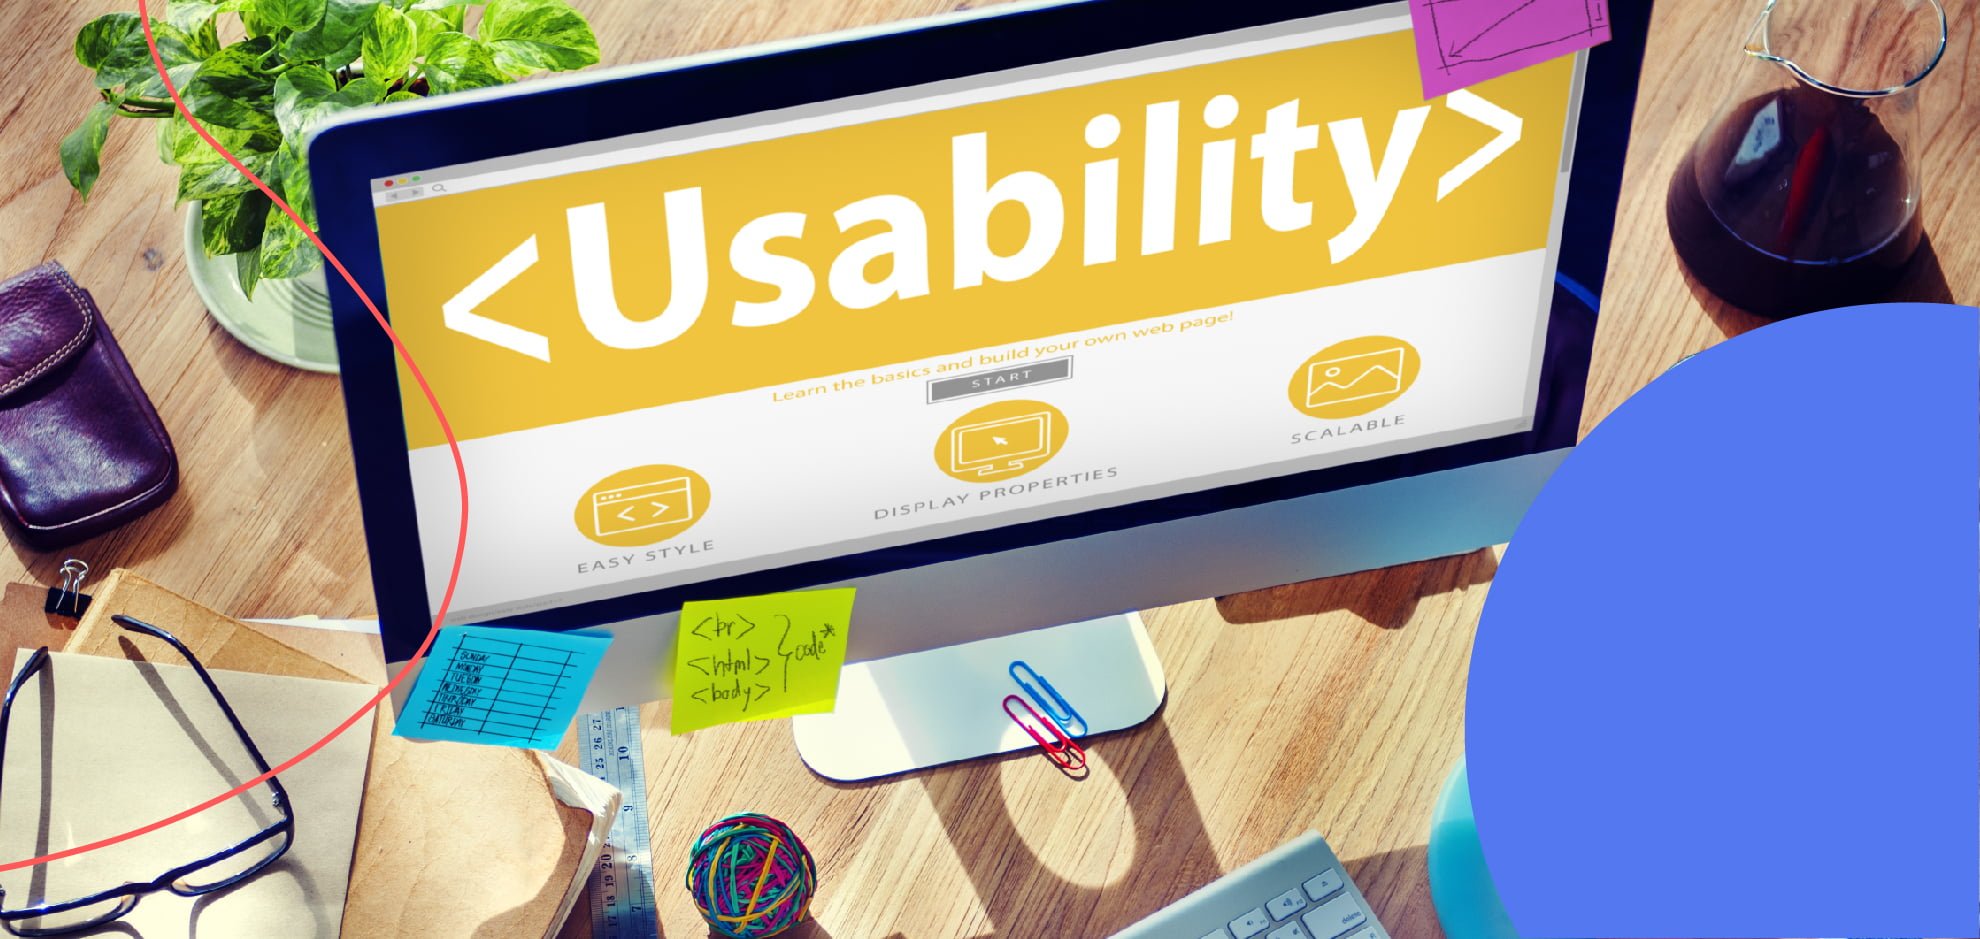 website usability practices and principles